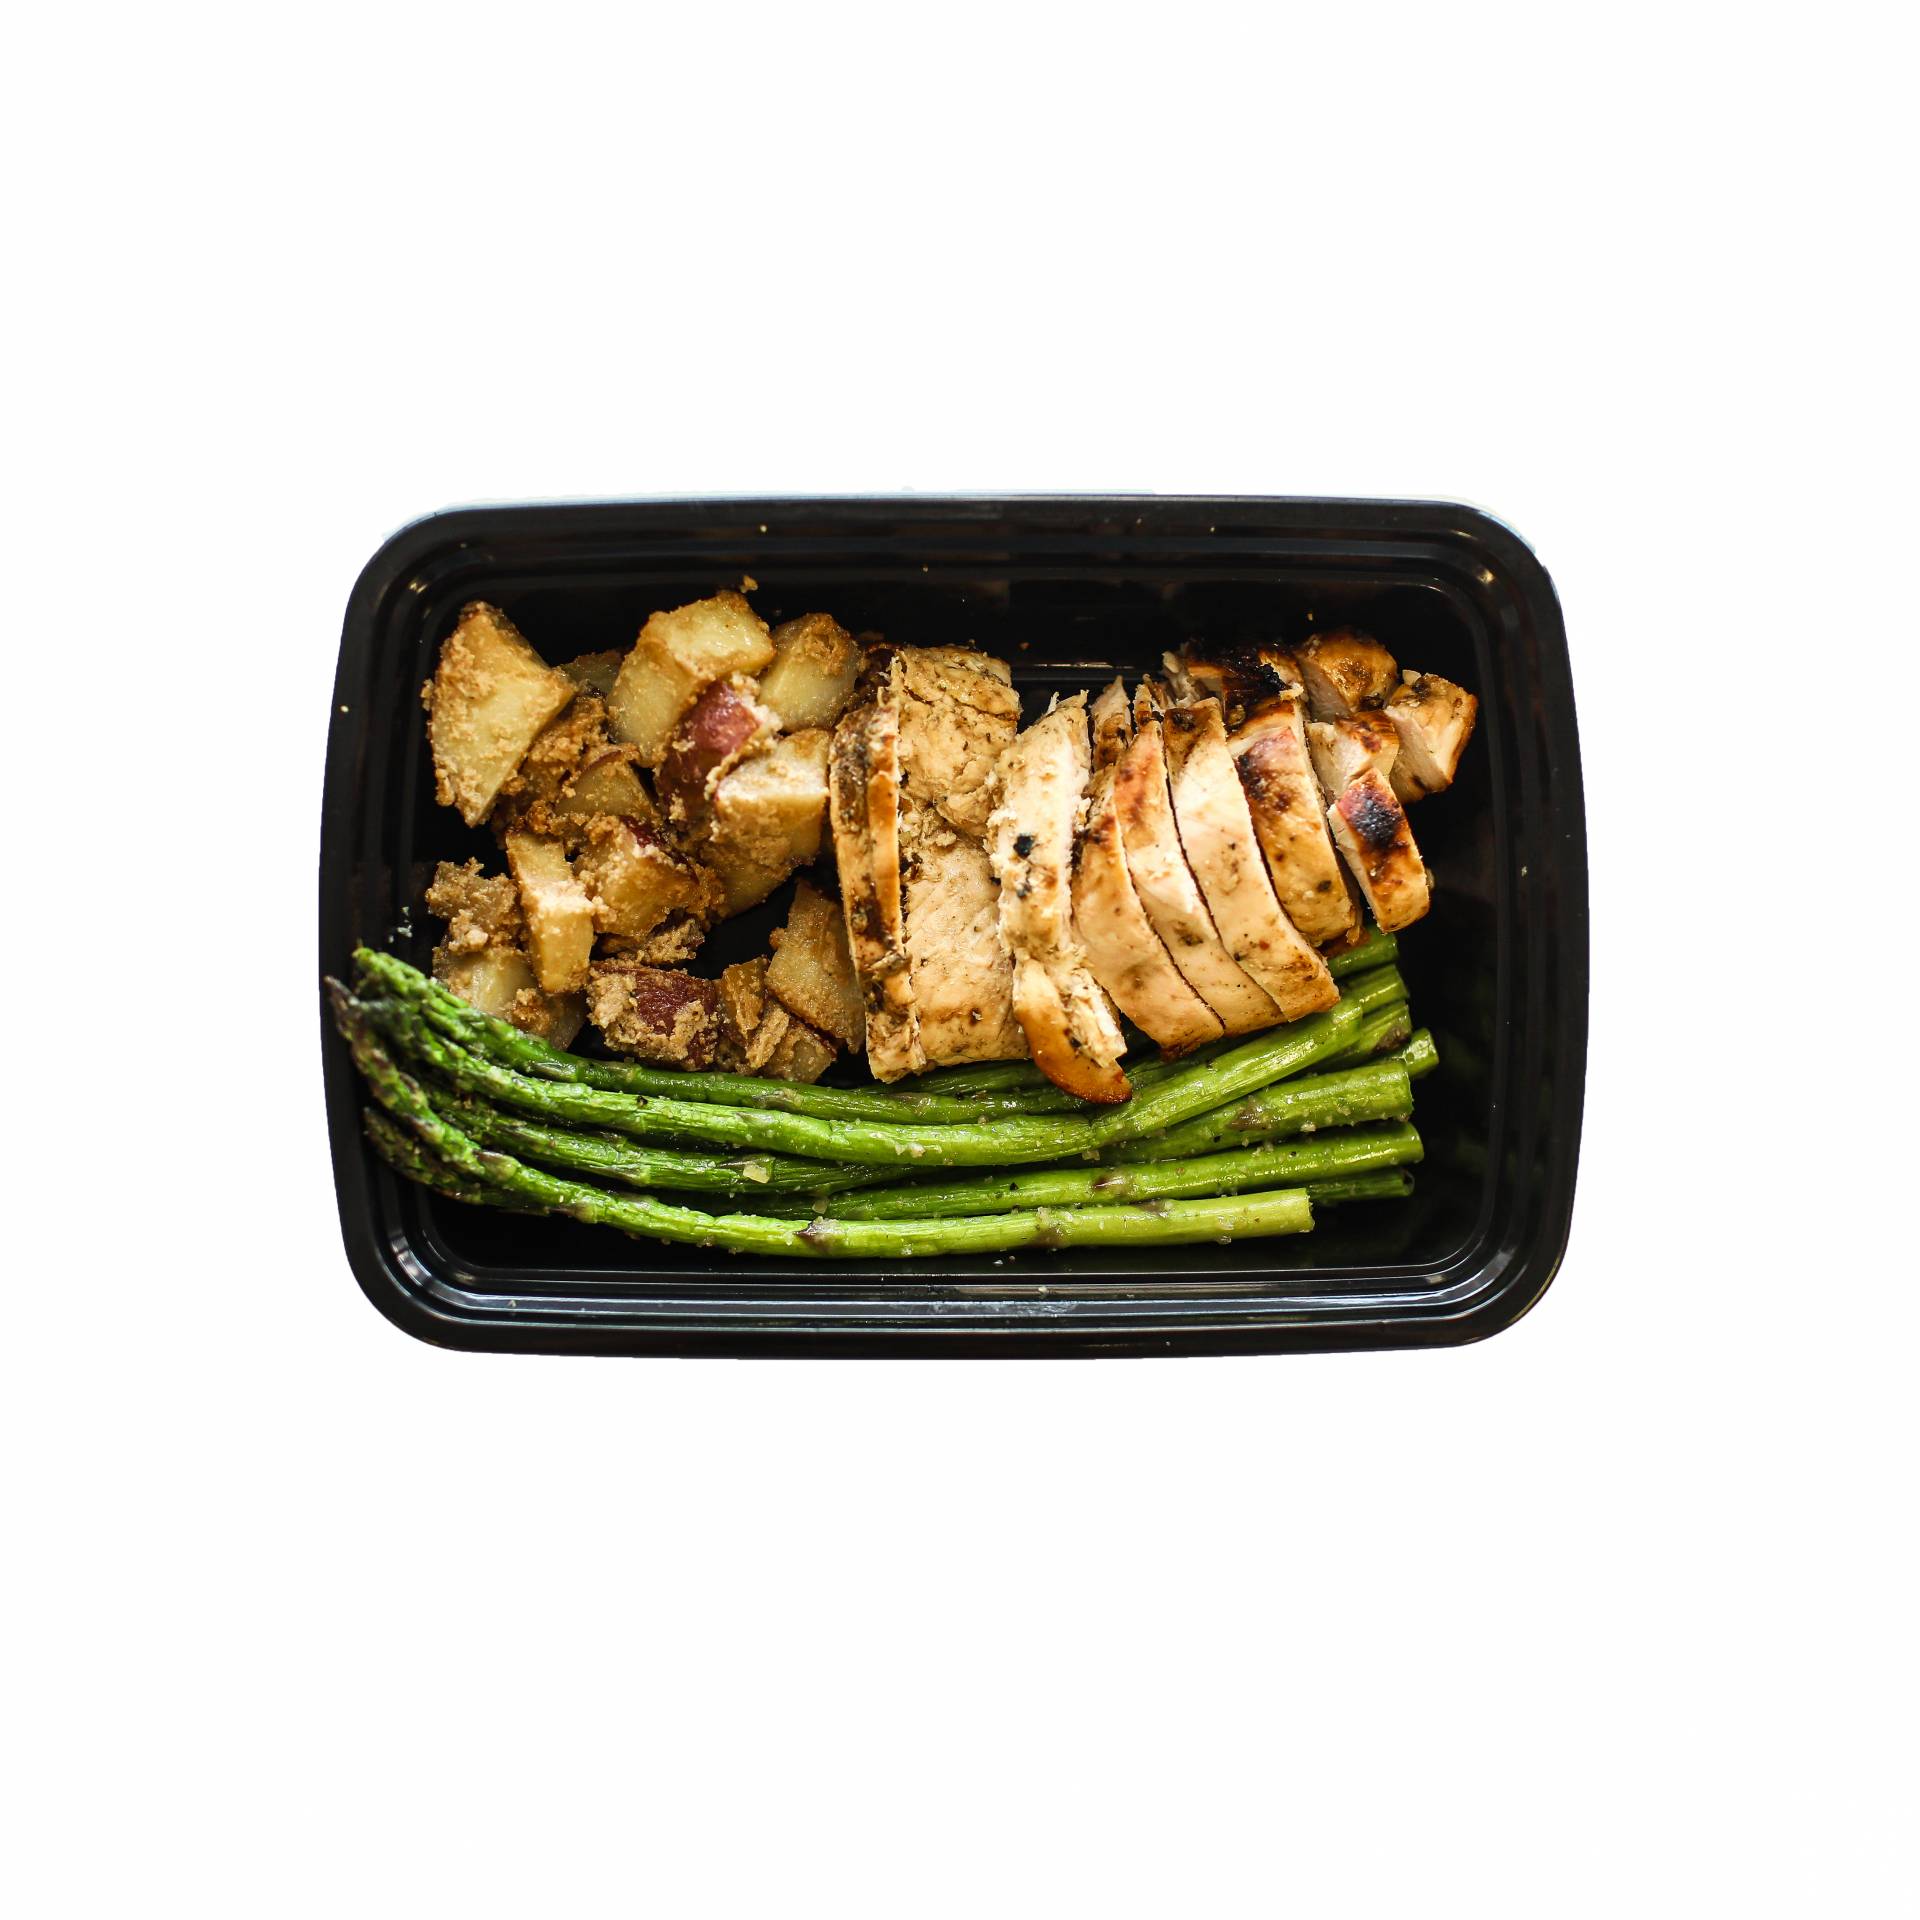 Grilled Chicken with Red Potatoes & Asparagus